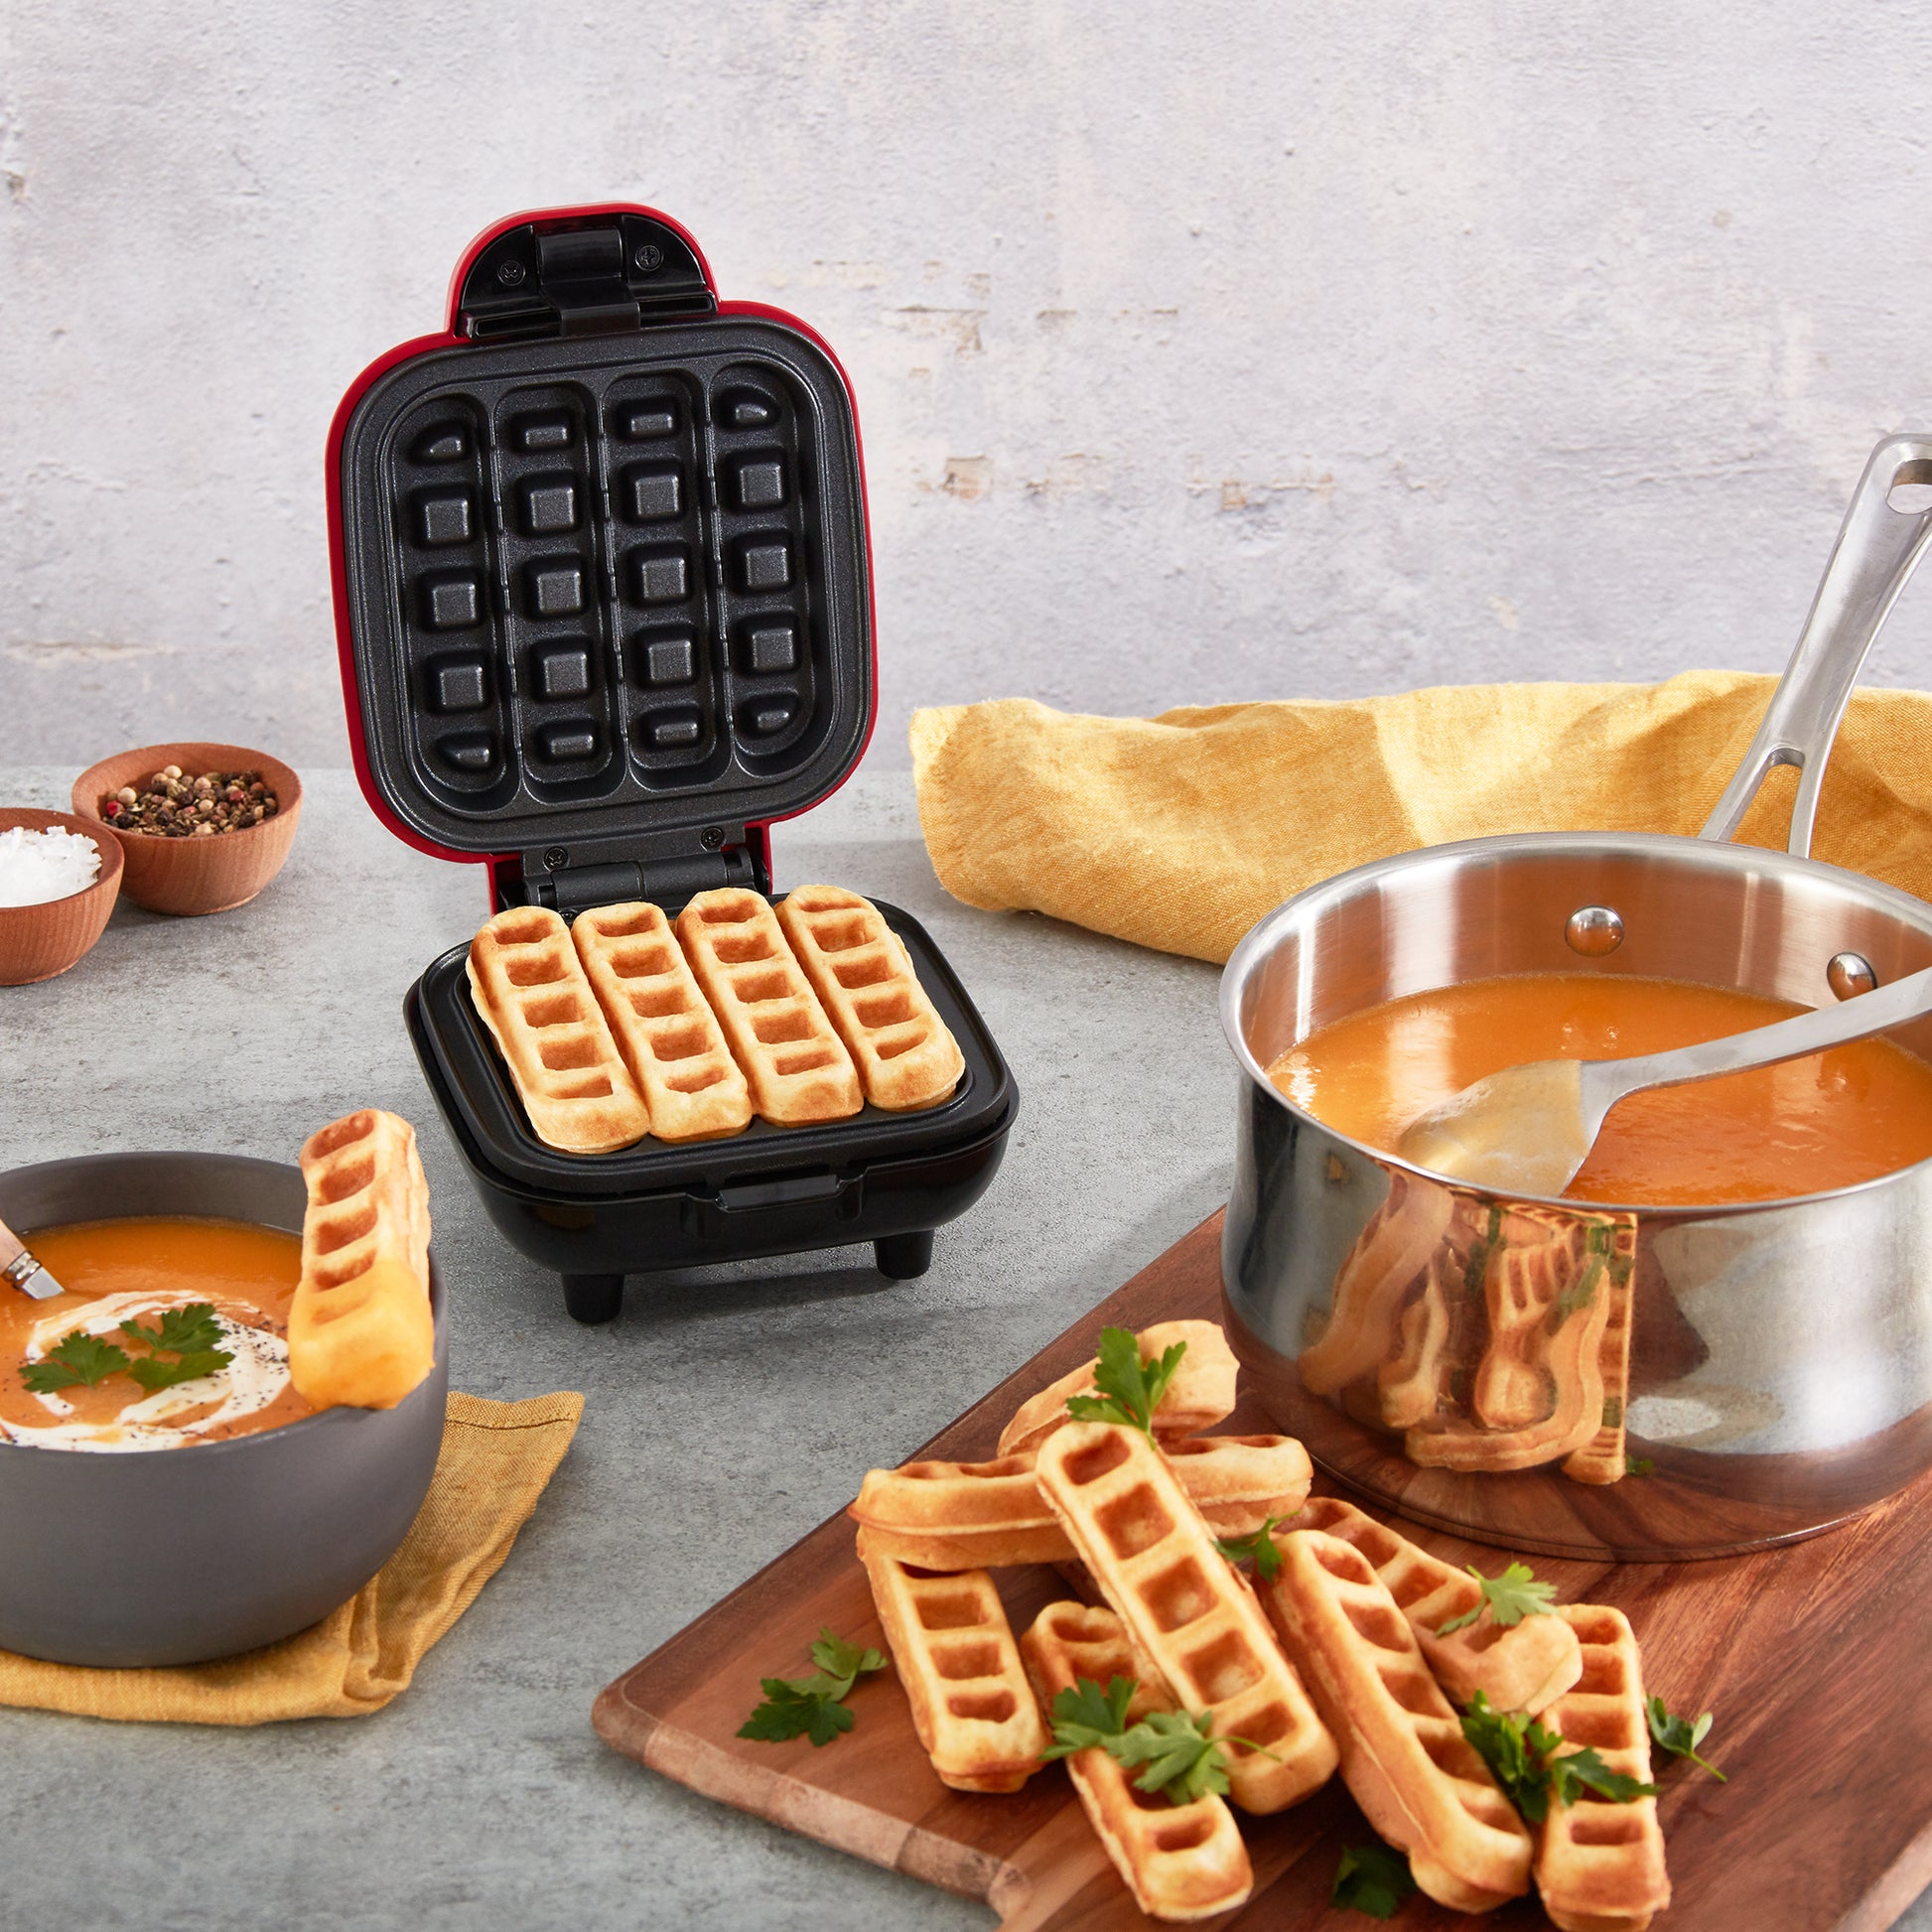 Dash Released A 'Tiny Chef' Mini Waffle Maker To Benefit The No